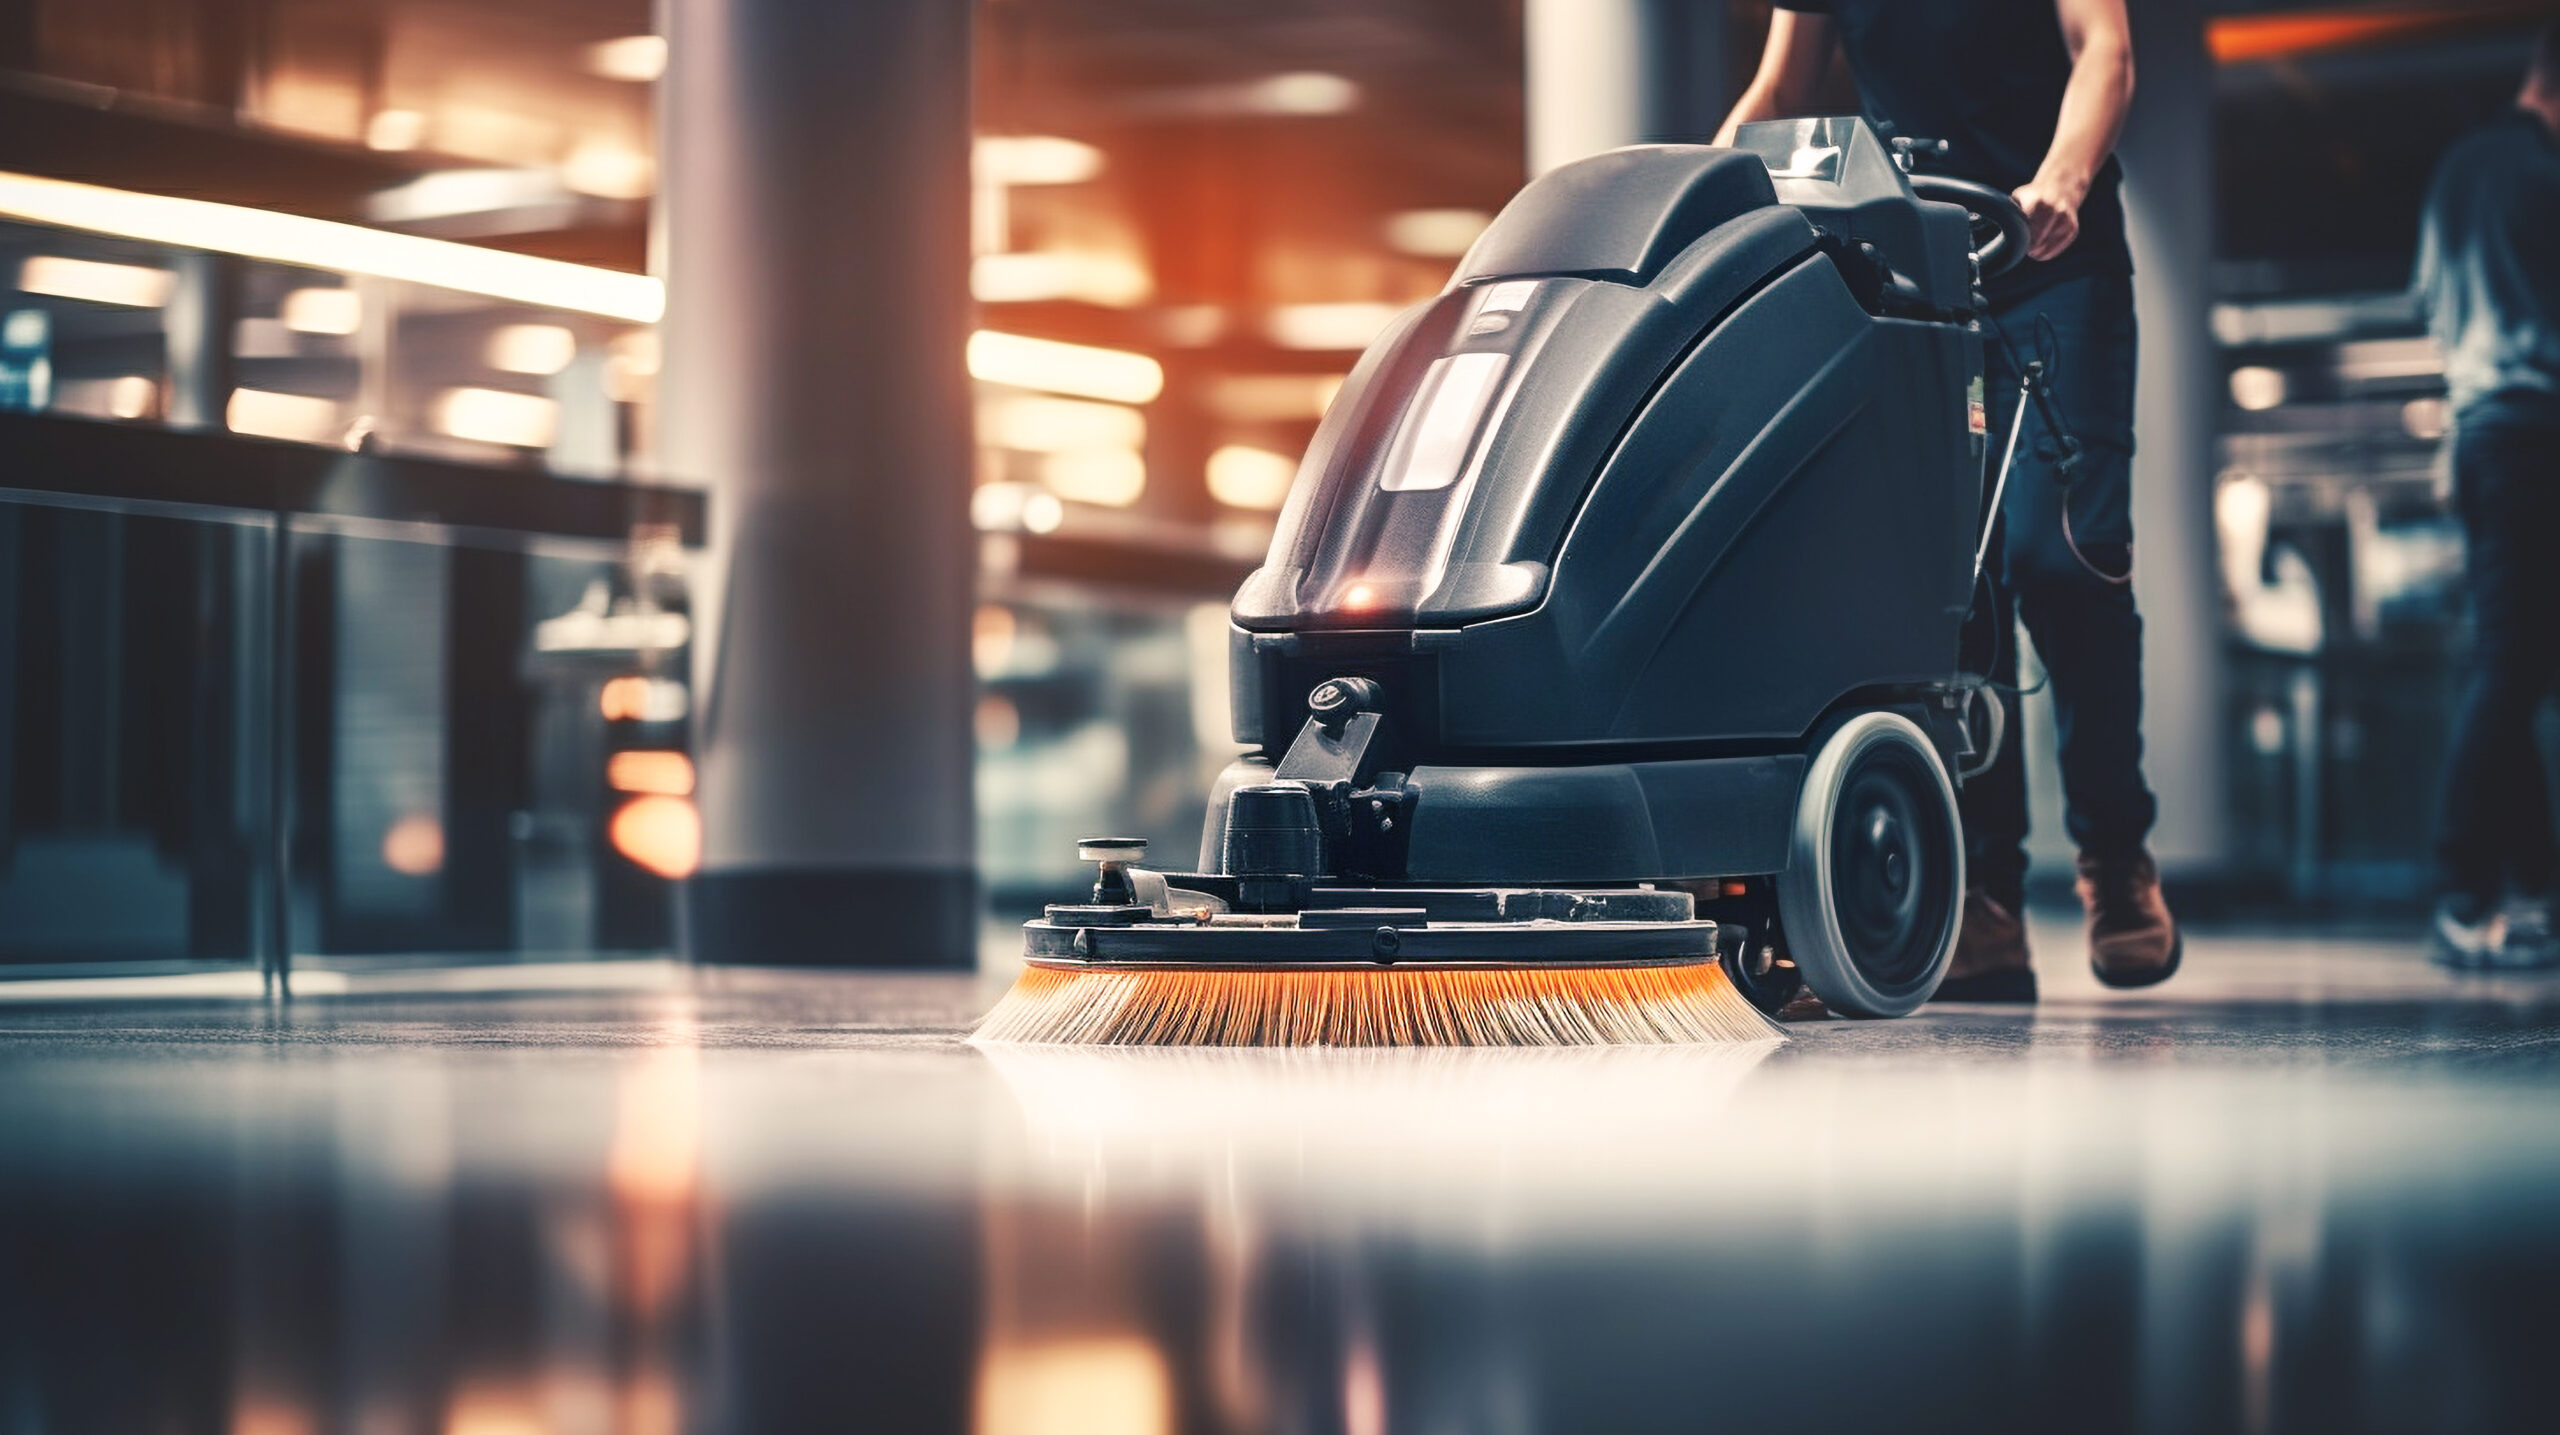 Floor Care: The Importance of Charge Algorithms